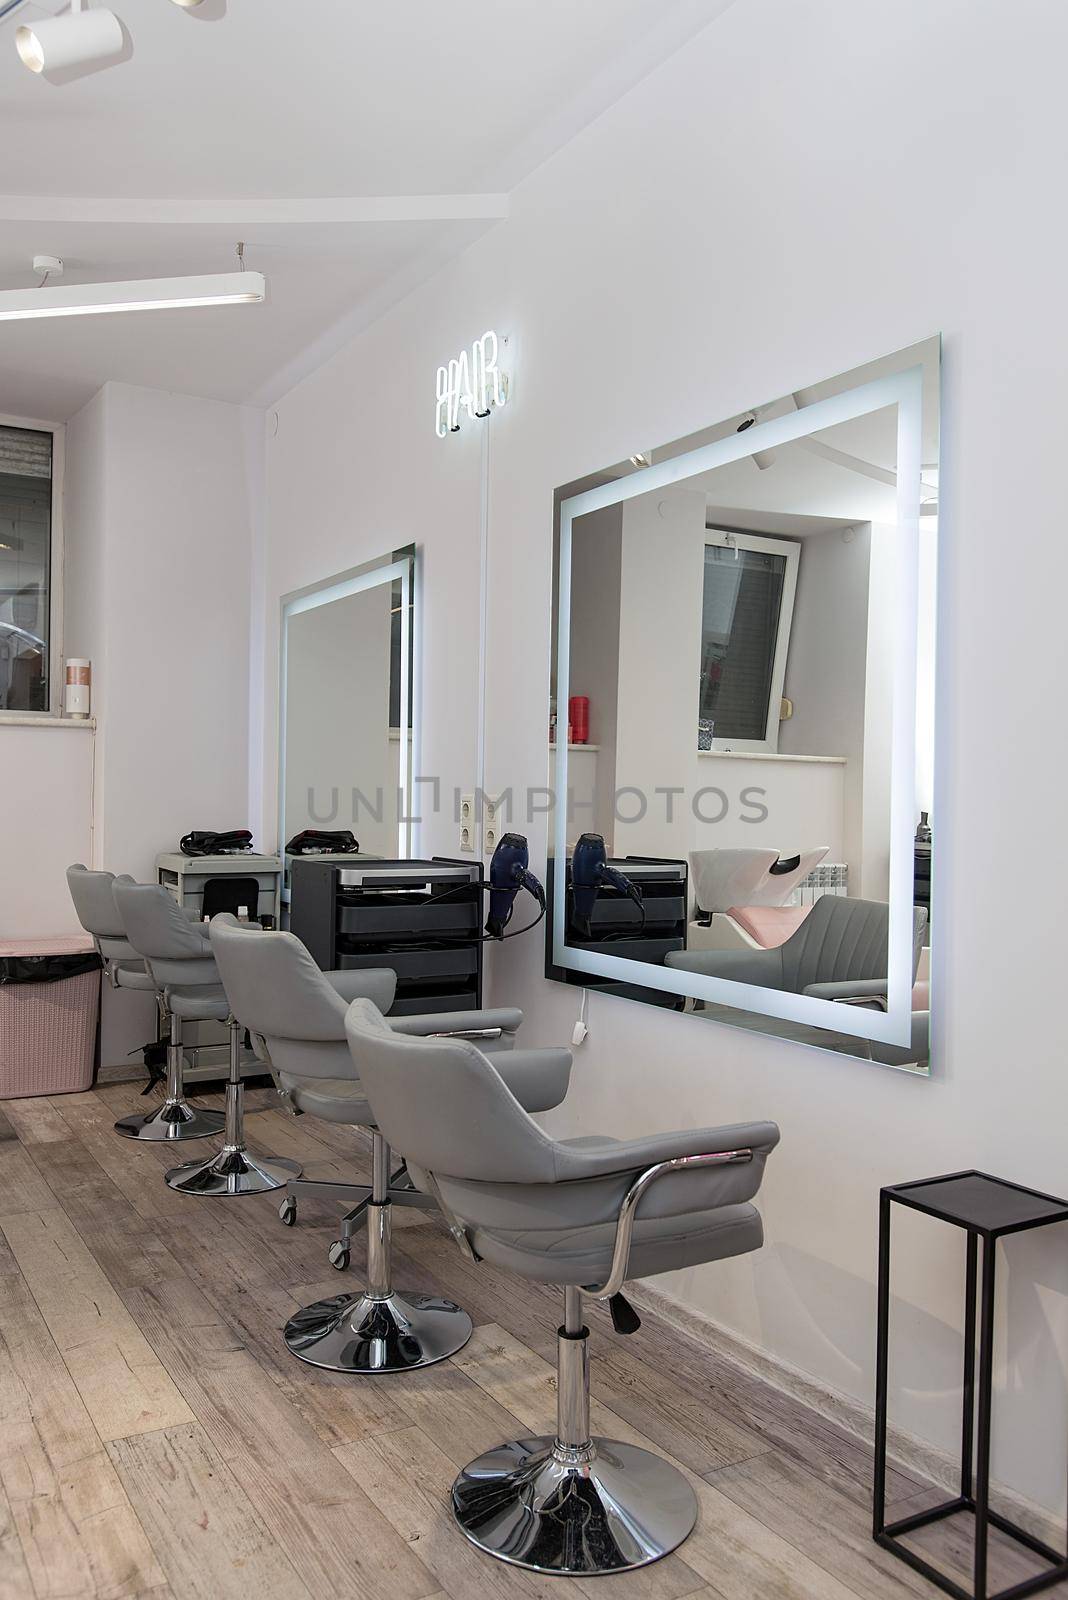 Workplace for haircut in barbershop, with backlit mirror. stylish chairs